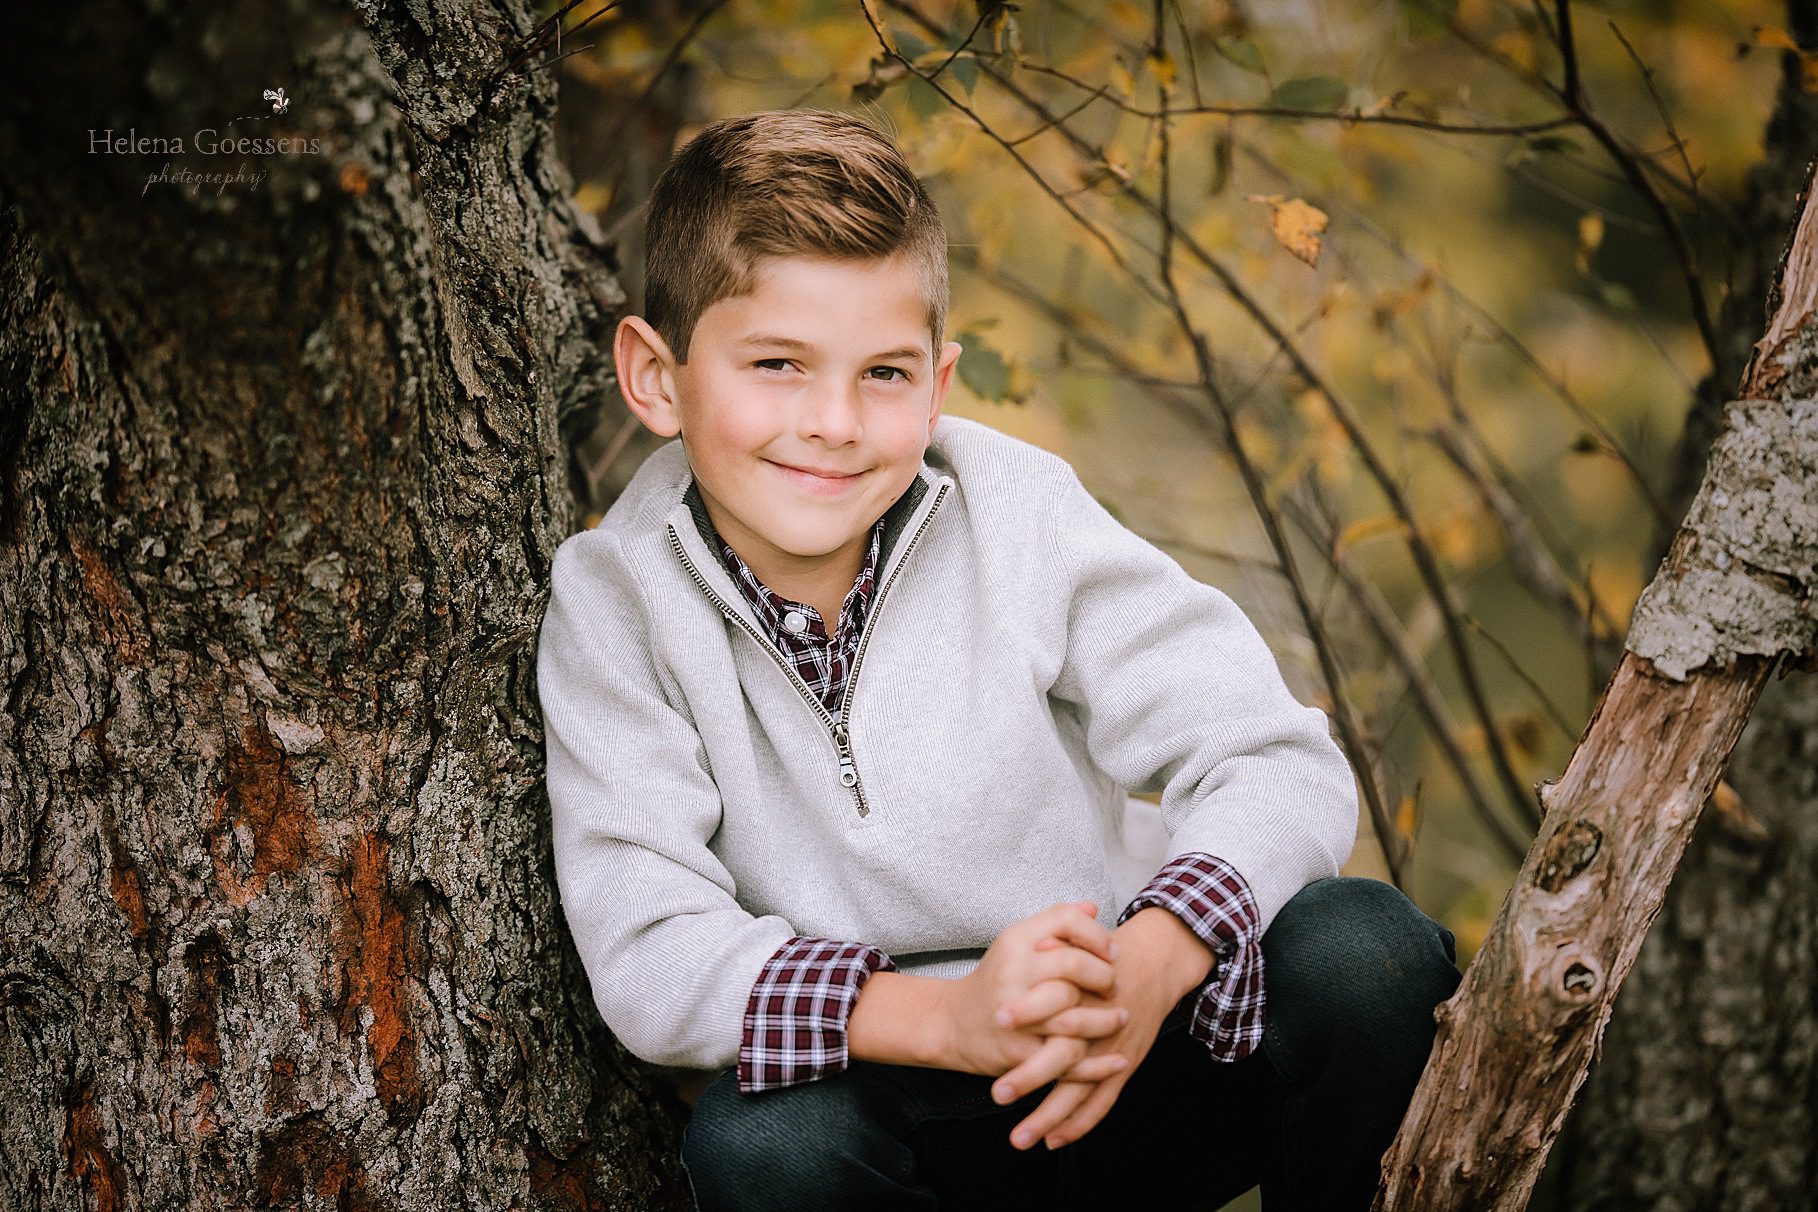 Larz Anderson family photos with Helena Goessens Photography